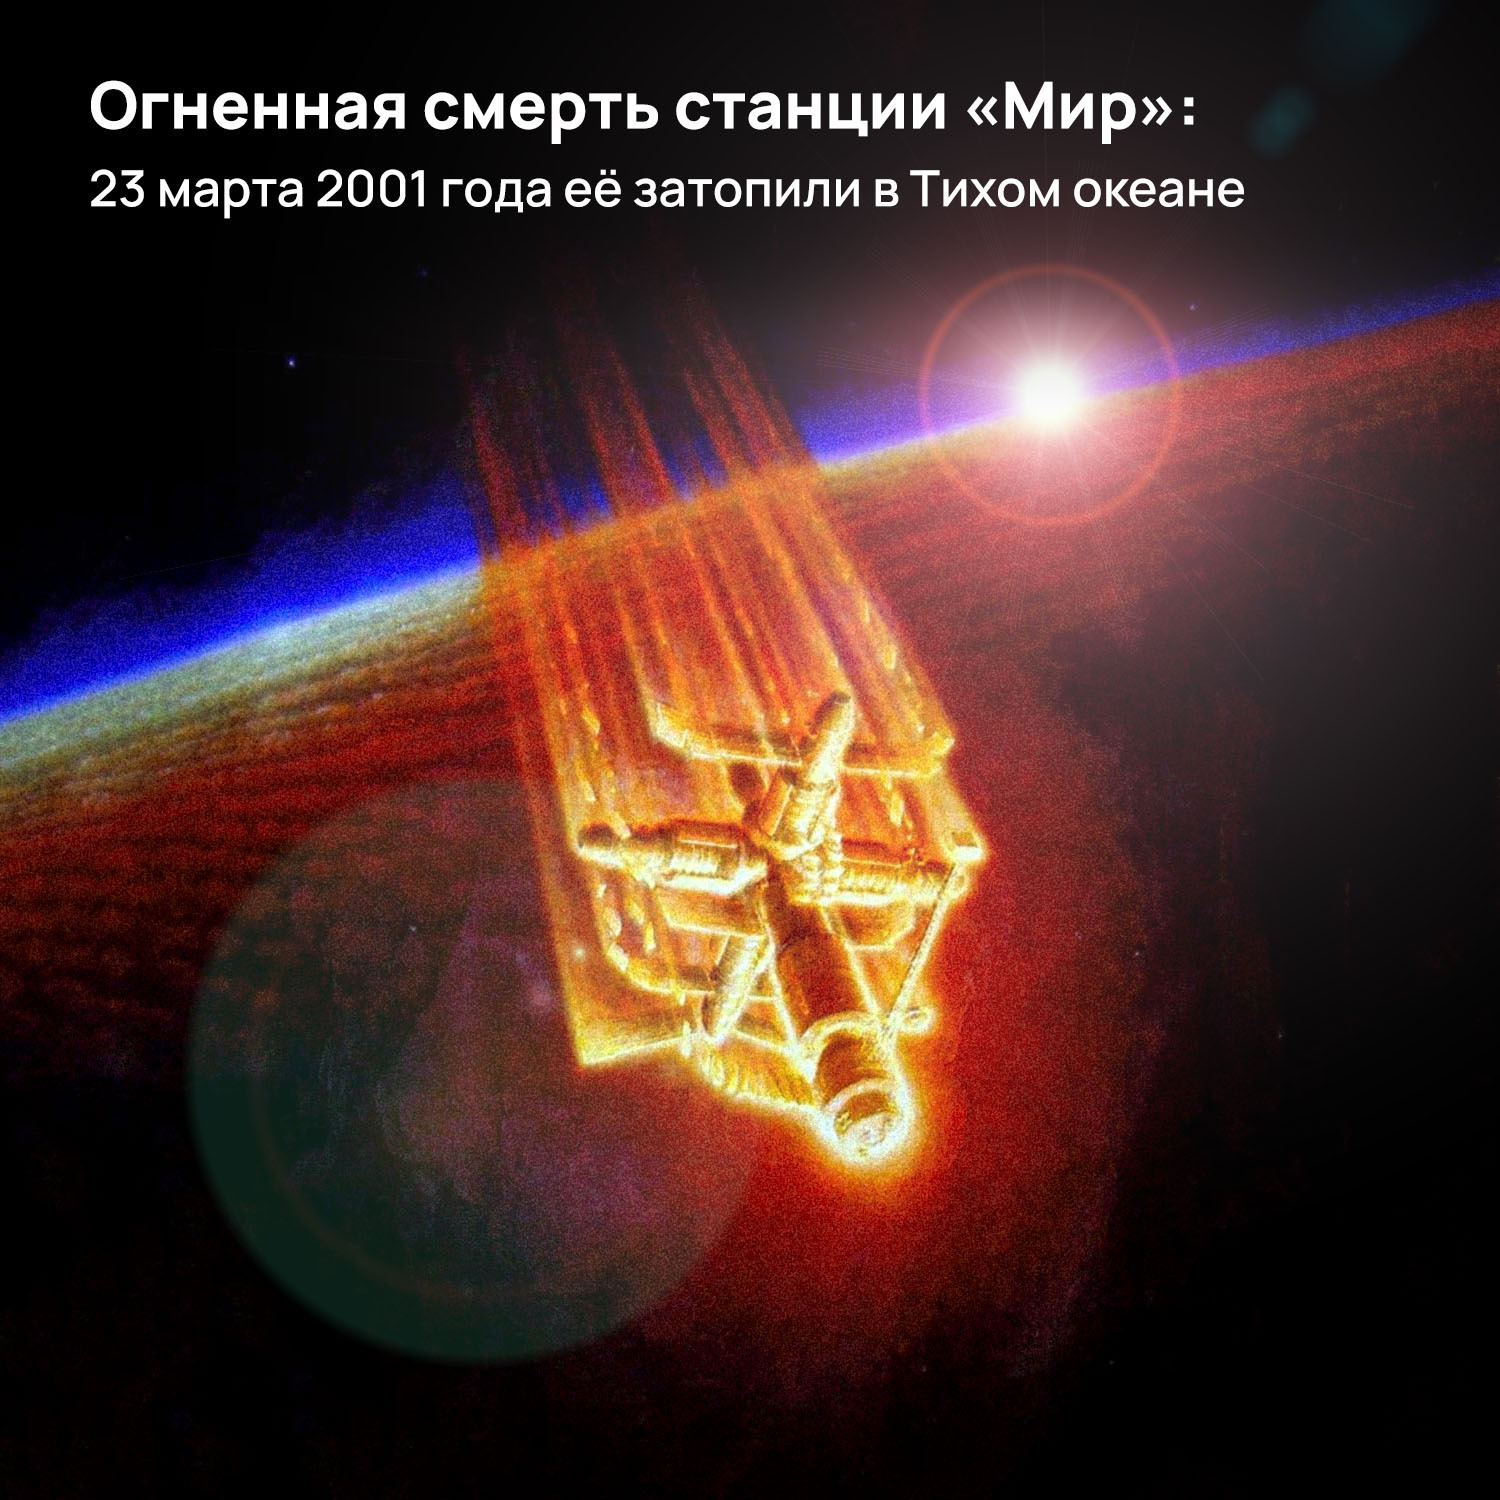 Fiery death of the Mir station: on March 23, 2001, it was flooded in the Pacific Ocean - Cosmonautics, Space, the USSR, Russia, Roscosmos, Station Mir, Video, Longpost, 